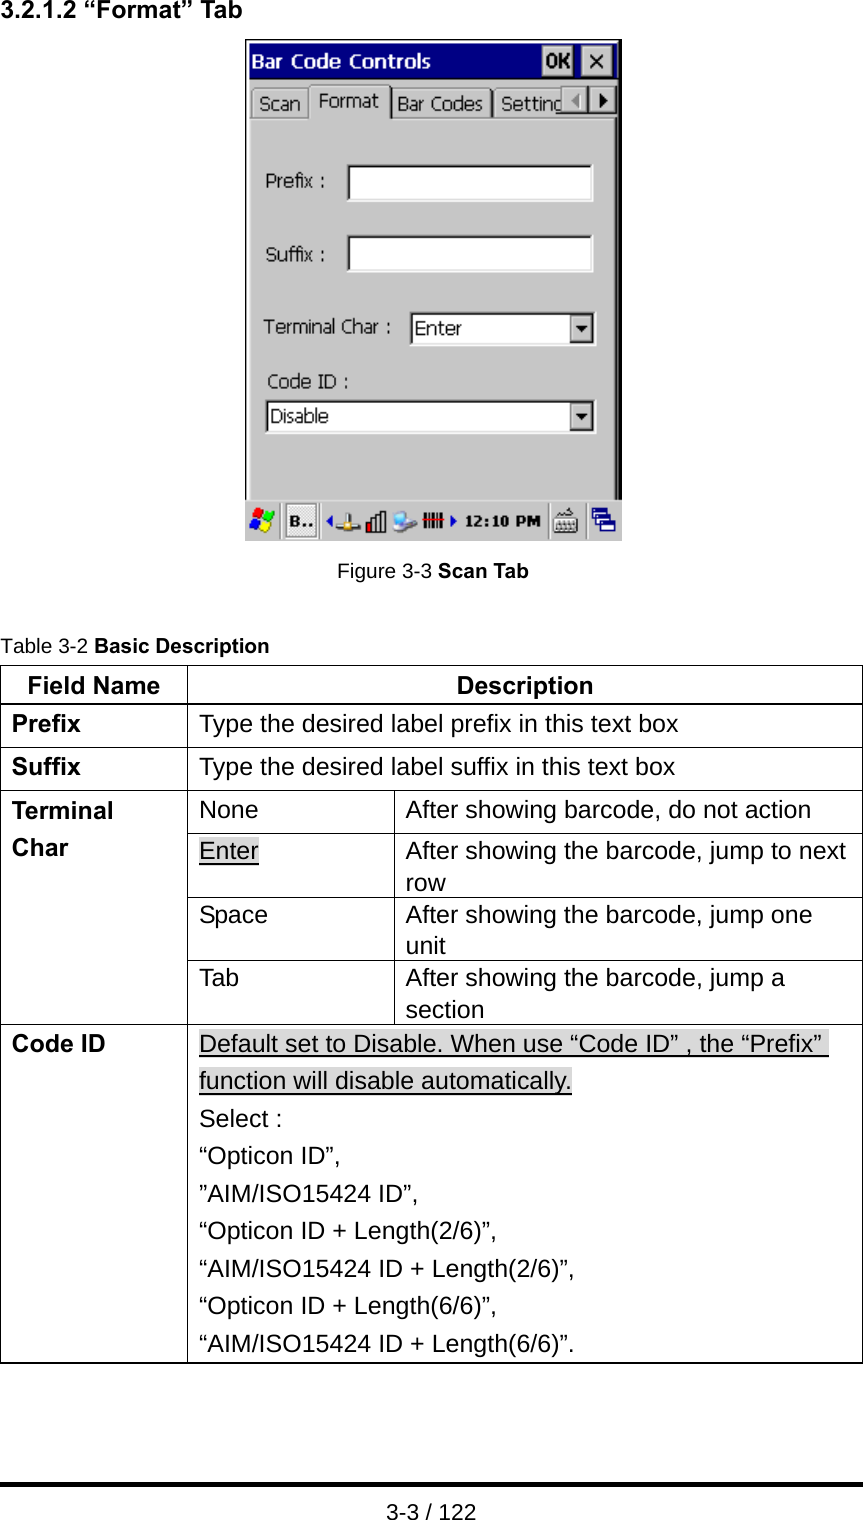  3-3 / 122 3.2.1.2 “Format” Tab  Figure 3-3 Scan Tab  Table 3-2 Basic Description Field Name  Description Prefix  Type the desired label prefix in this text box Suffix  Type the desired label suffix in this text box None  After showing barcode, do not action Enter  After showing the barcode, jump to next row Space  After showing the barcode, jump one unit Terminal Char Tab  After showing the barcode, jump a section Code ID  Default set to Disable. When use “Code ID” , the “Prefix” function will disable automatically. Select : “Opticon ID”,   ”AIM/ISO15424 ID”,   “Opticon ID + Length(2/6)”,   “AIM/ISO15424 ID + Length(2/6)”, “Opticon ID + Length(6/6)”,   “AIM/ISO15424 ID + Length(6/6)”.   